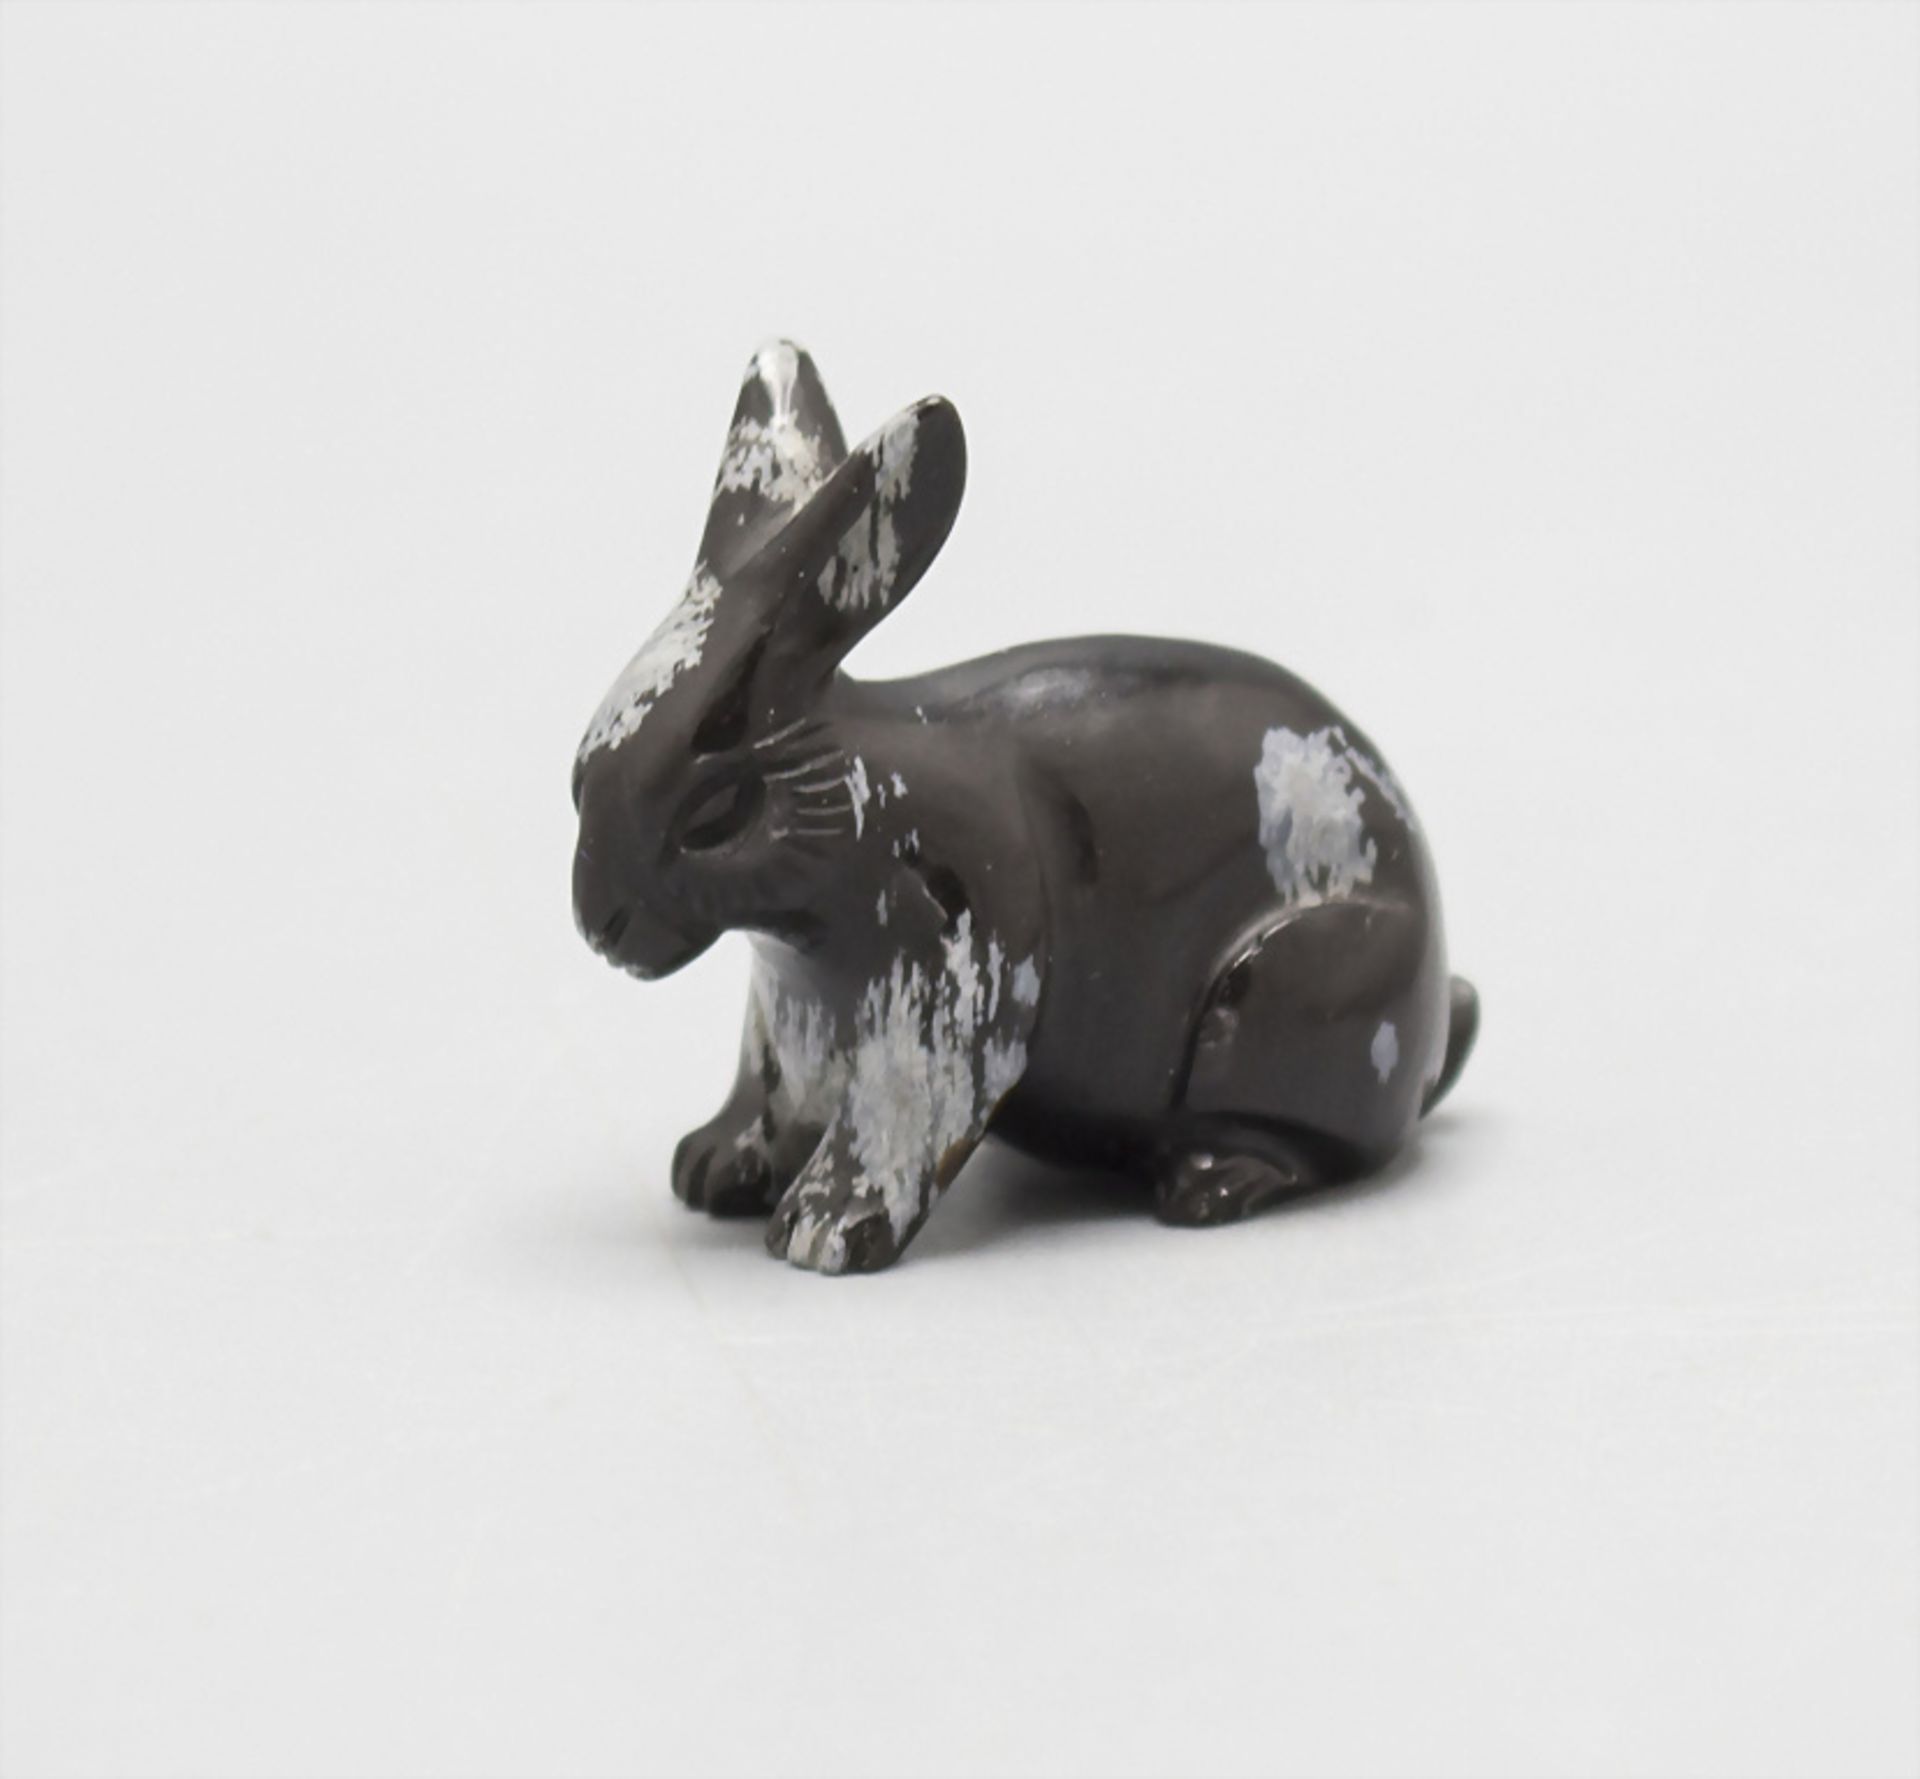 Miniatur Steinfigur 'Kaninchen' / A miniature carved stone rabbit, China, 20. Jh, - Image 2 of 4